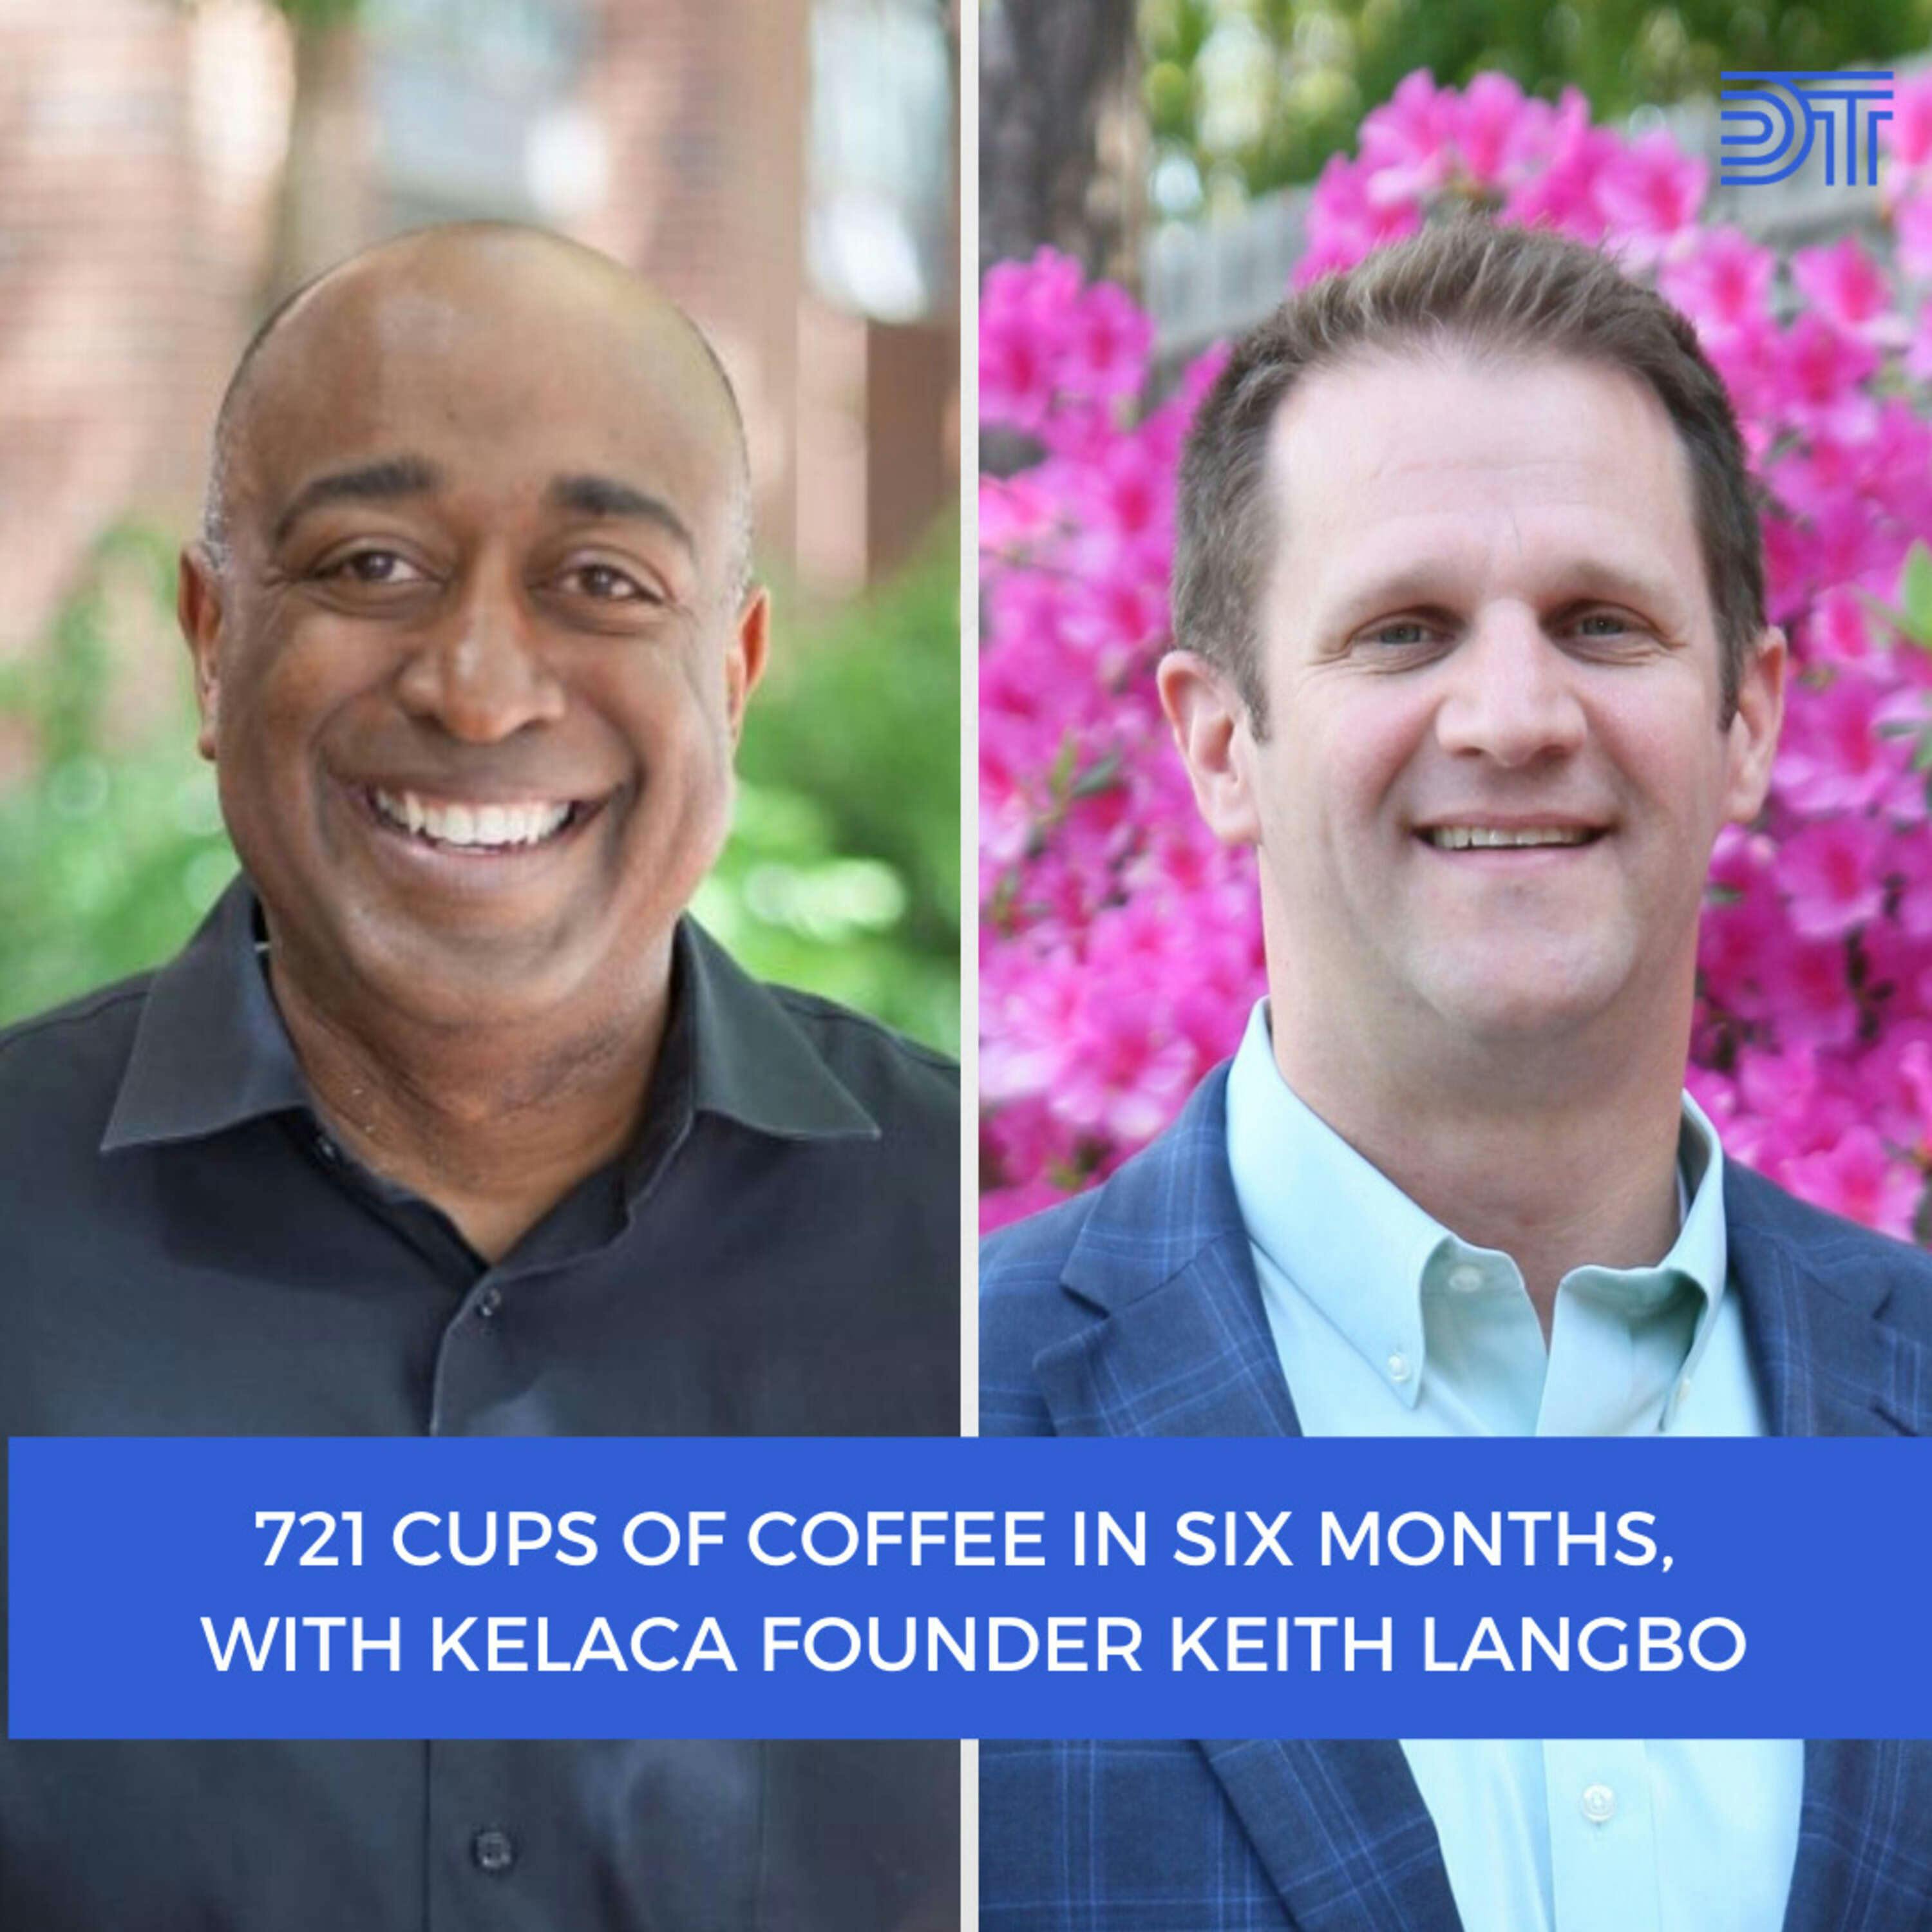 721 ”Cups of Coffee” in Six Months, with Kelaca CEO Keith Langbo